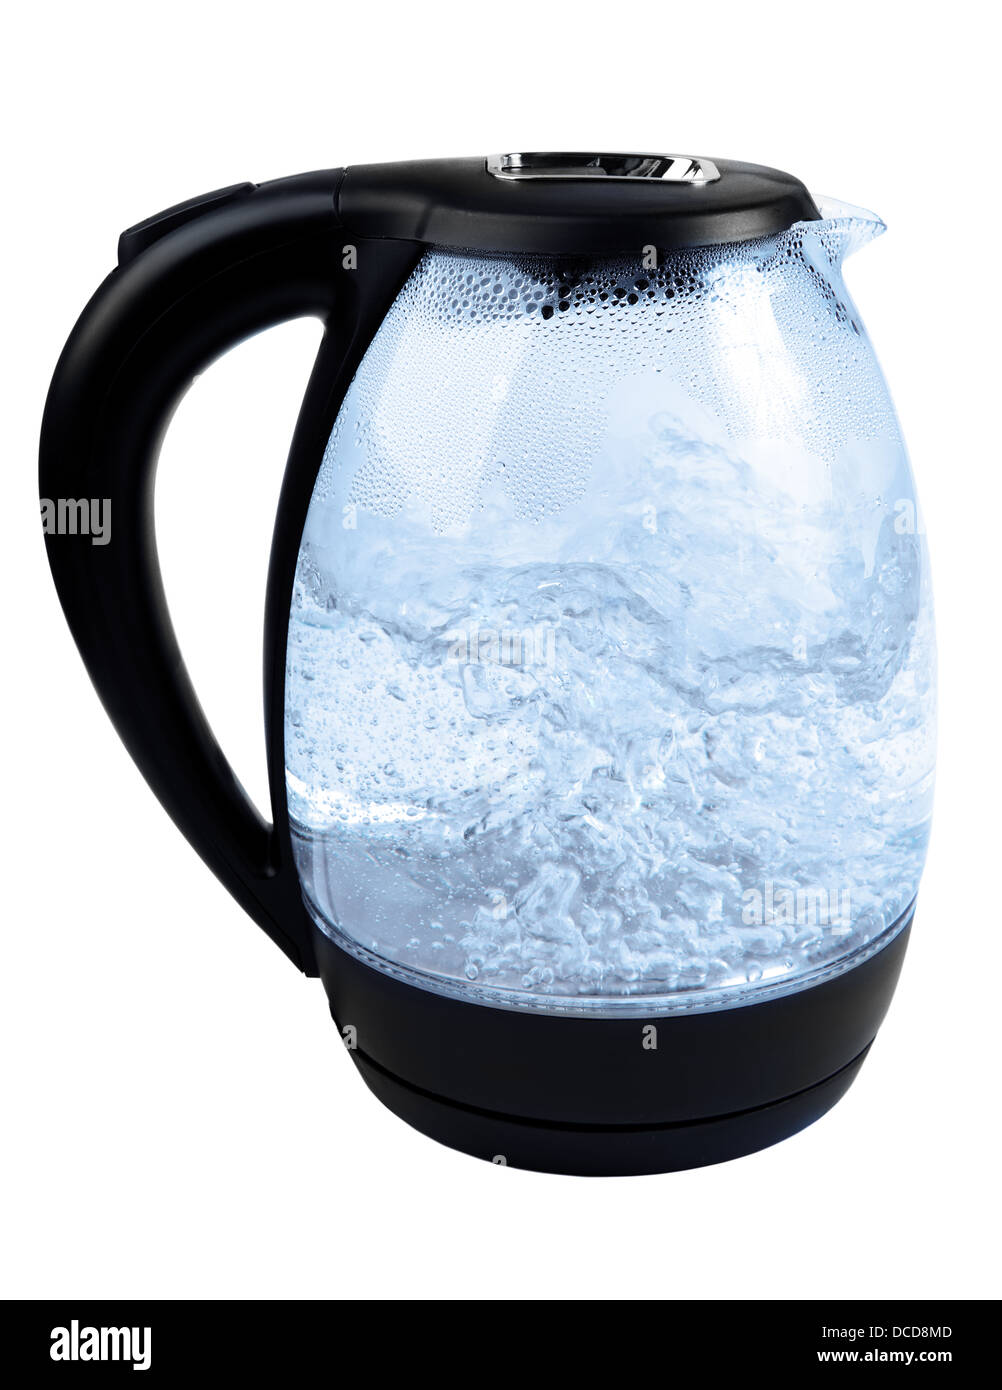 https://c8.alamy.com/comp/DCD8MD/modern-kettle-with-blue-illumination-boiling-water-over-white-DCD8MD.jpg